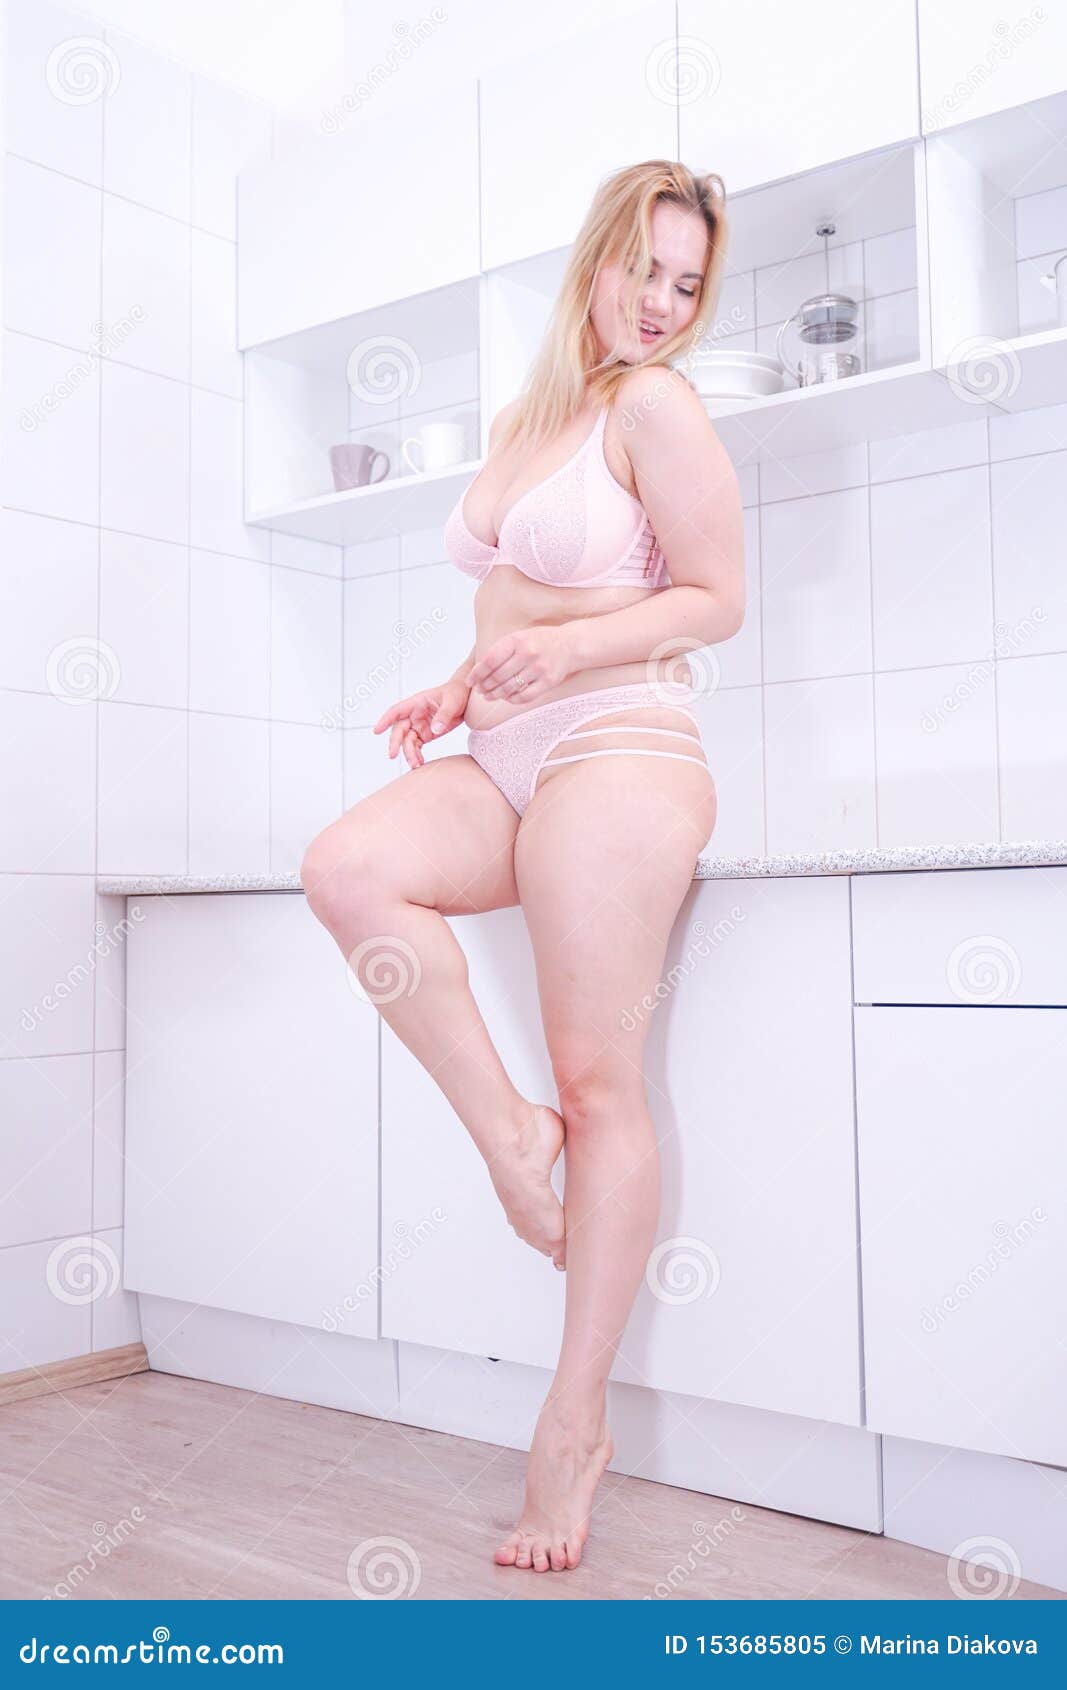 Beauty Blonde Caucasian Girl with Chubby Body in Pink Lingerie on